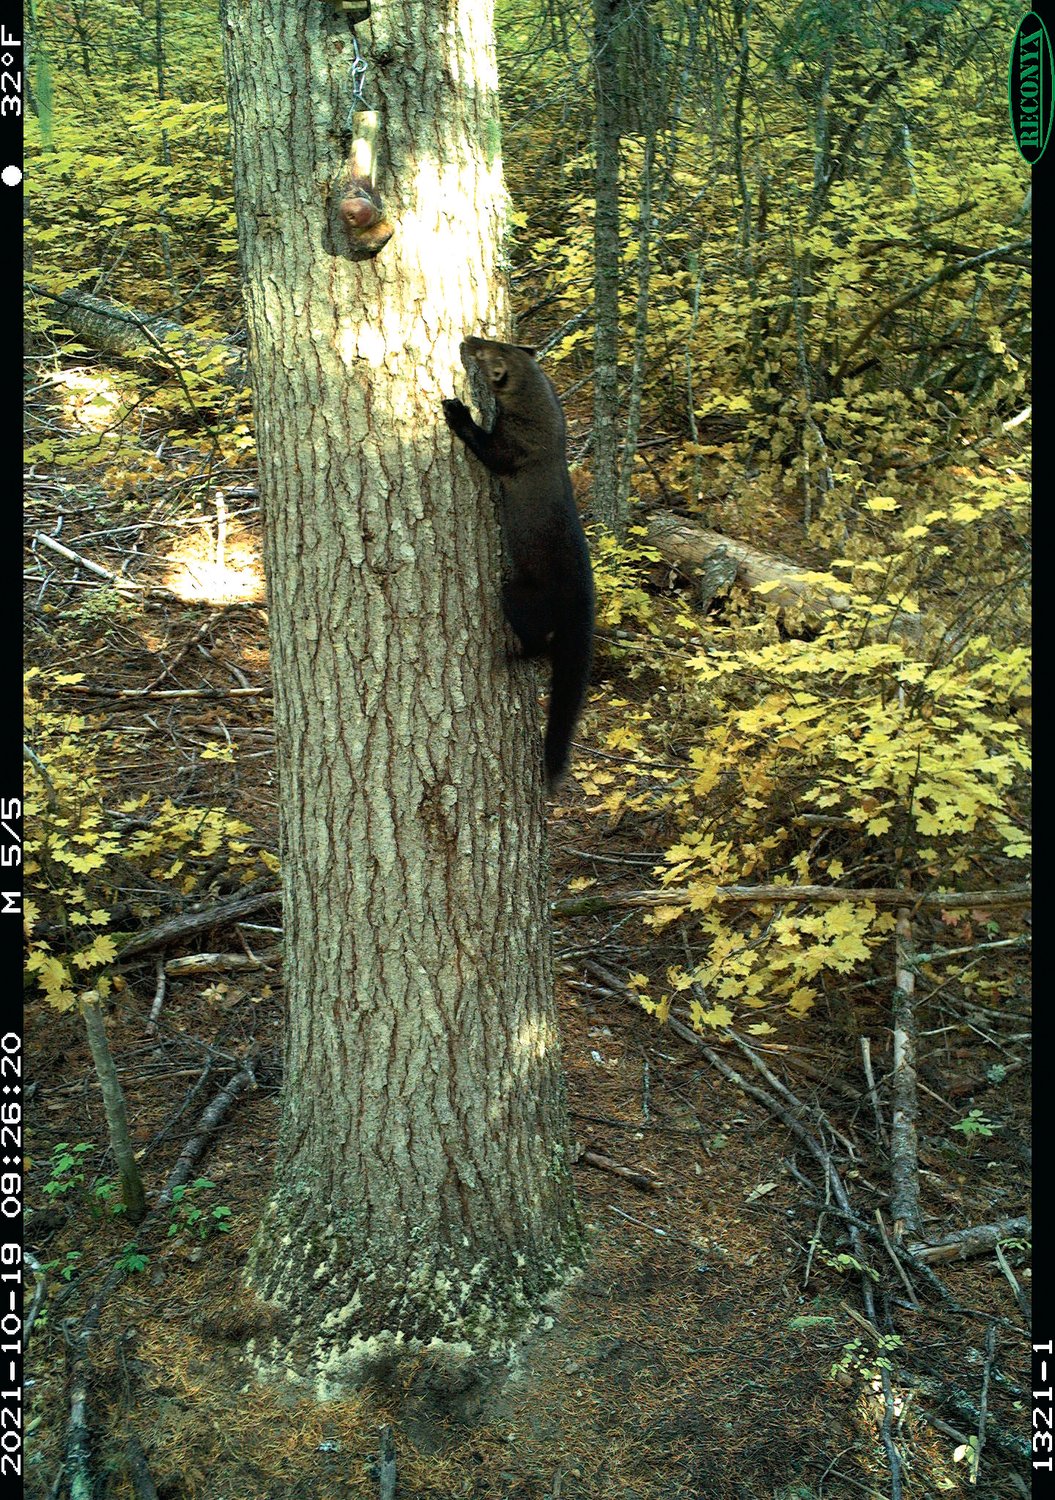 A fisher is pictured in an image from remote camera stations in the Gifford Pinchot National Forest.